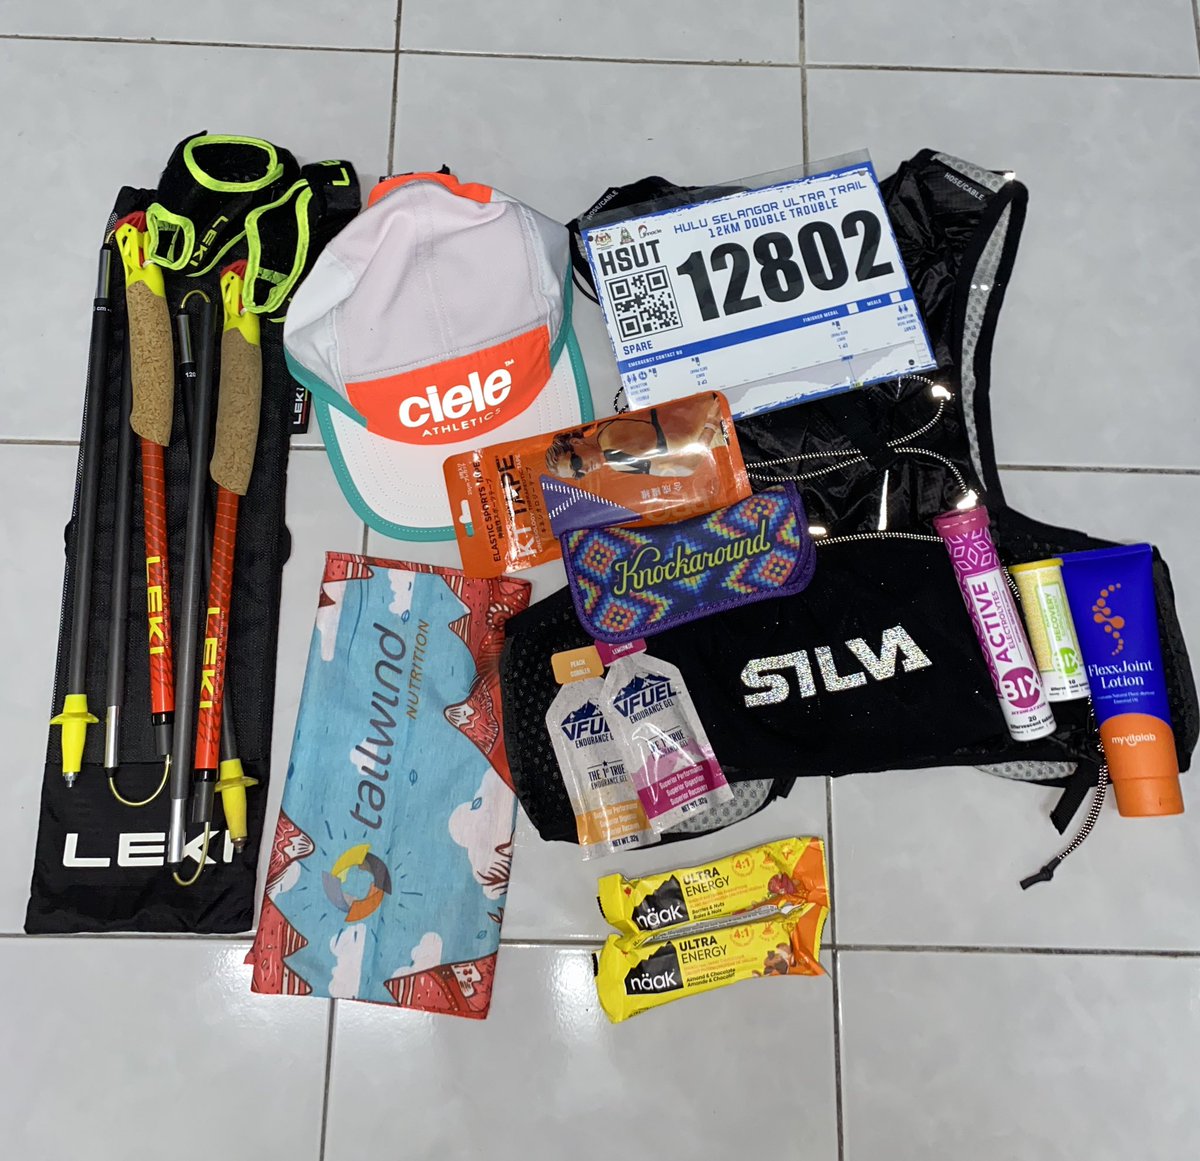 Hulu Selangor Ultra Trail 2023

After a while, first trail event in this year and counting for more…

#raceflatlay 
#hsut2023